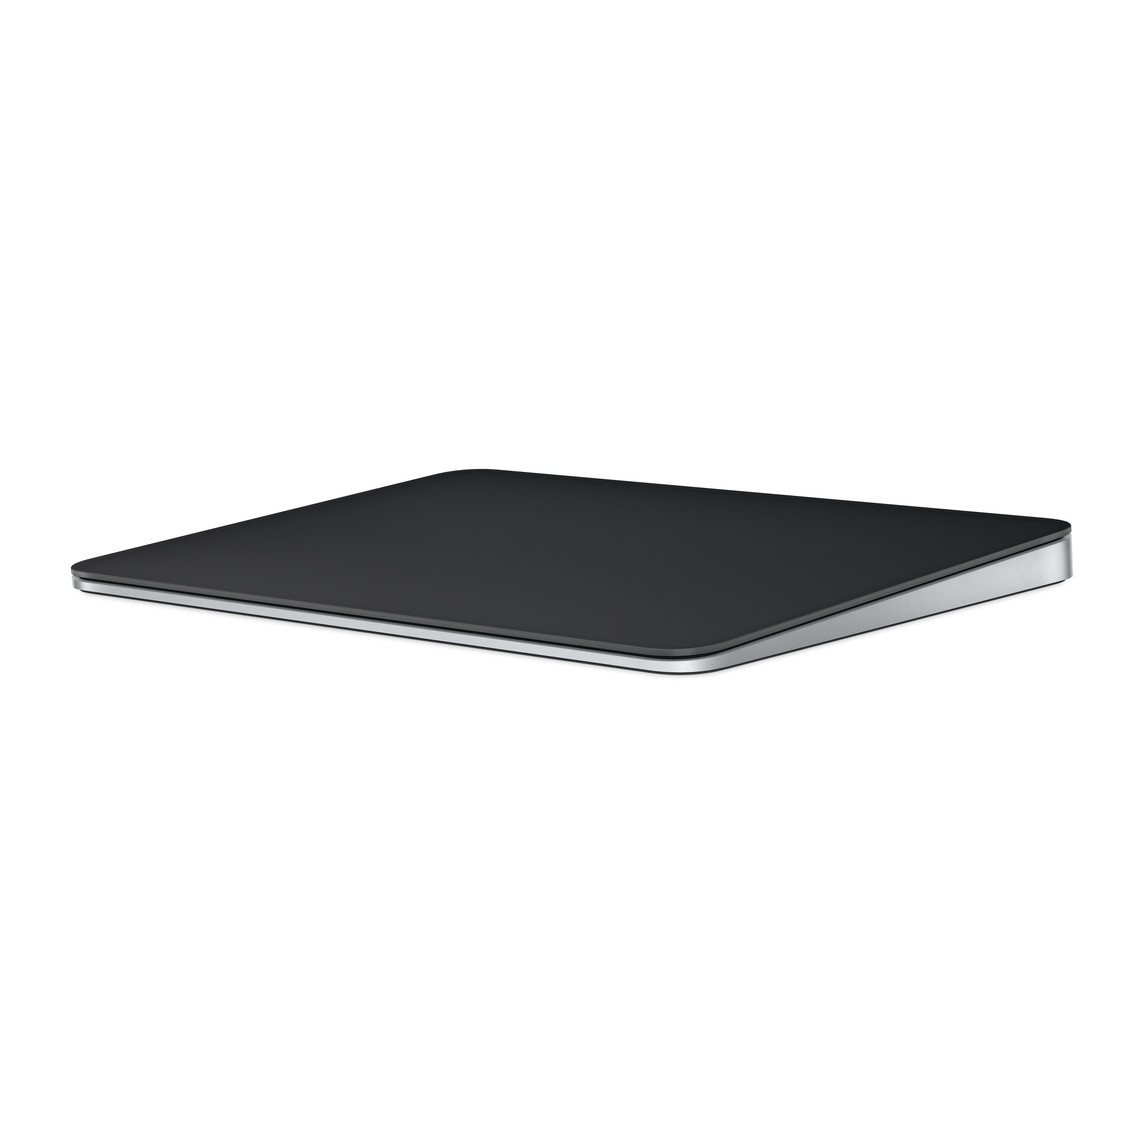 Picture of Apple Magic Trackpad - Black Multi-Touch Surface